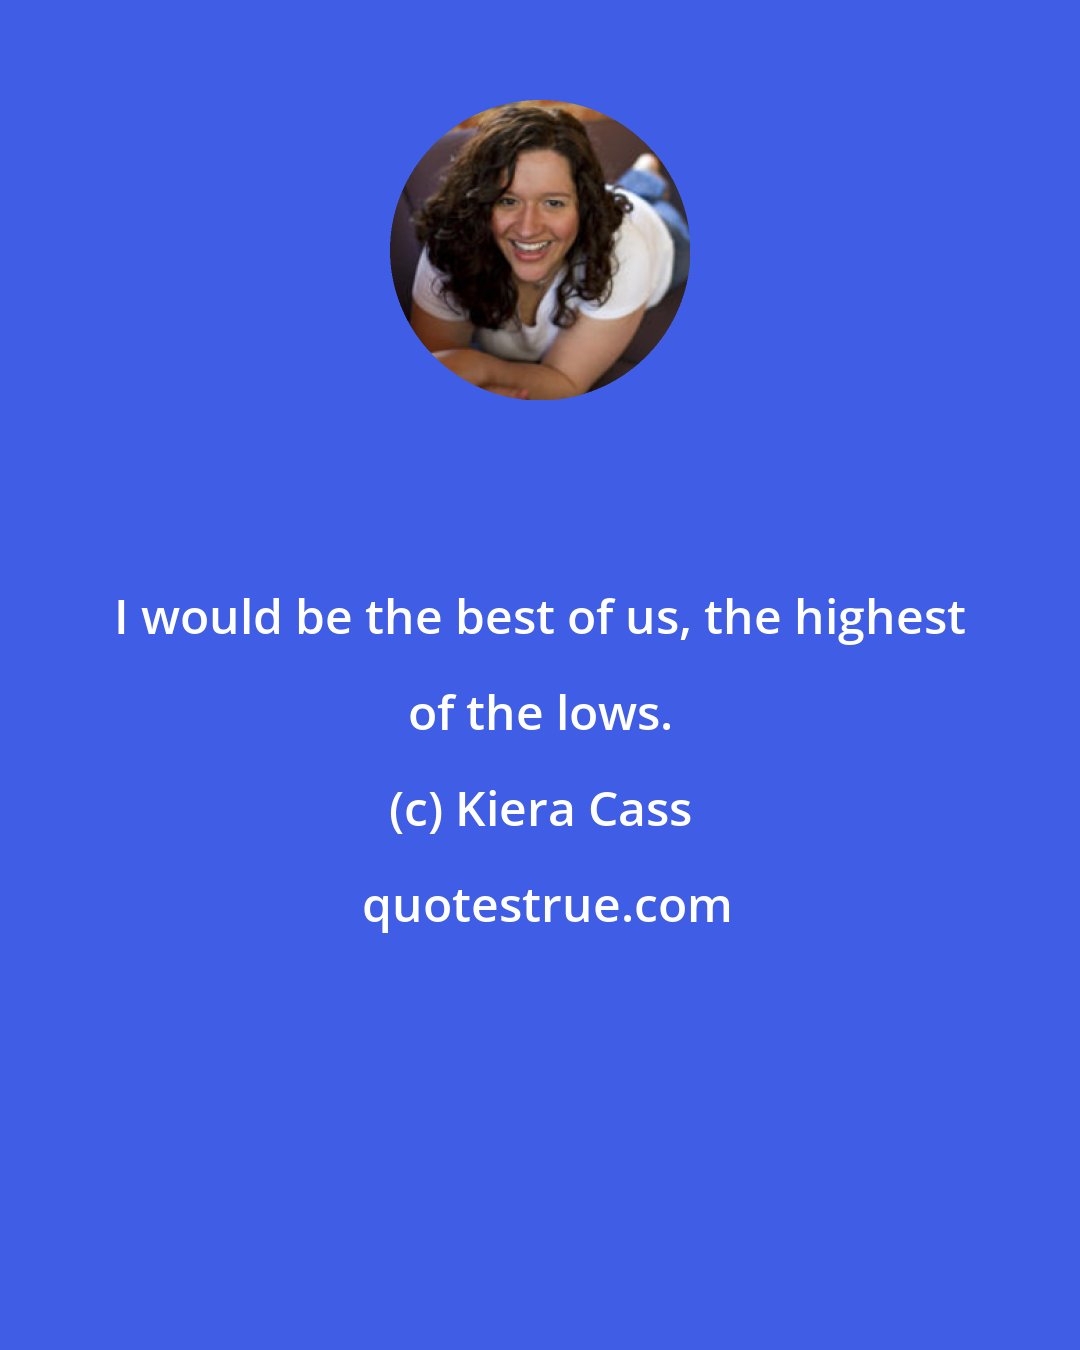 Kiera Cass: I would be the best of us, the highest of the lows.